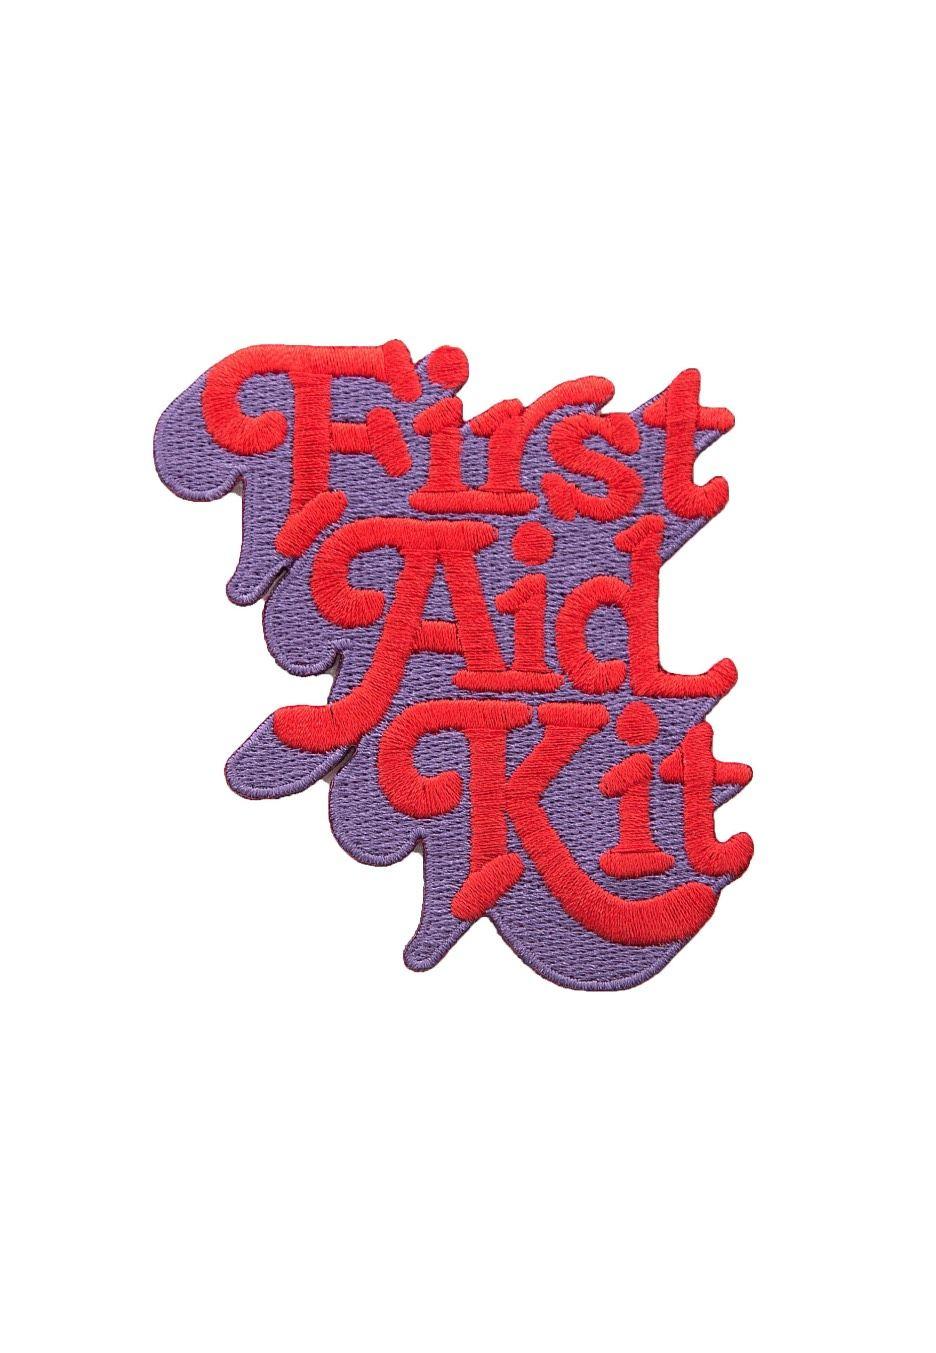 First Aid Box Logo - First Aid Kit - Logo - Patch - Official Pop Merchandise Shop ...